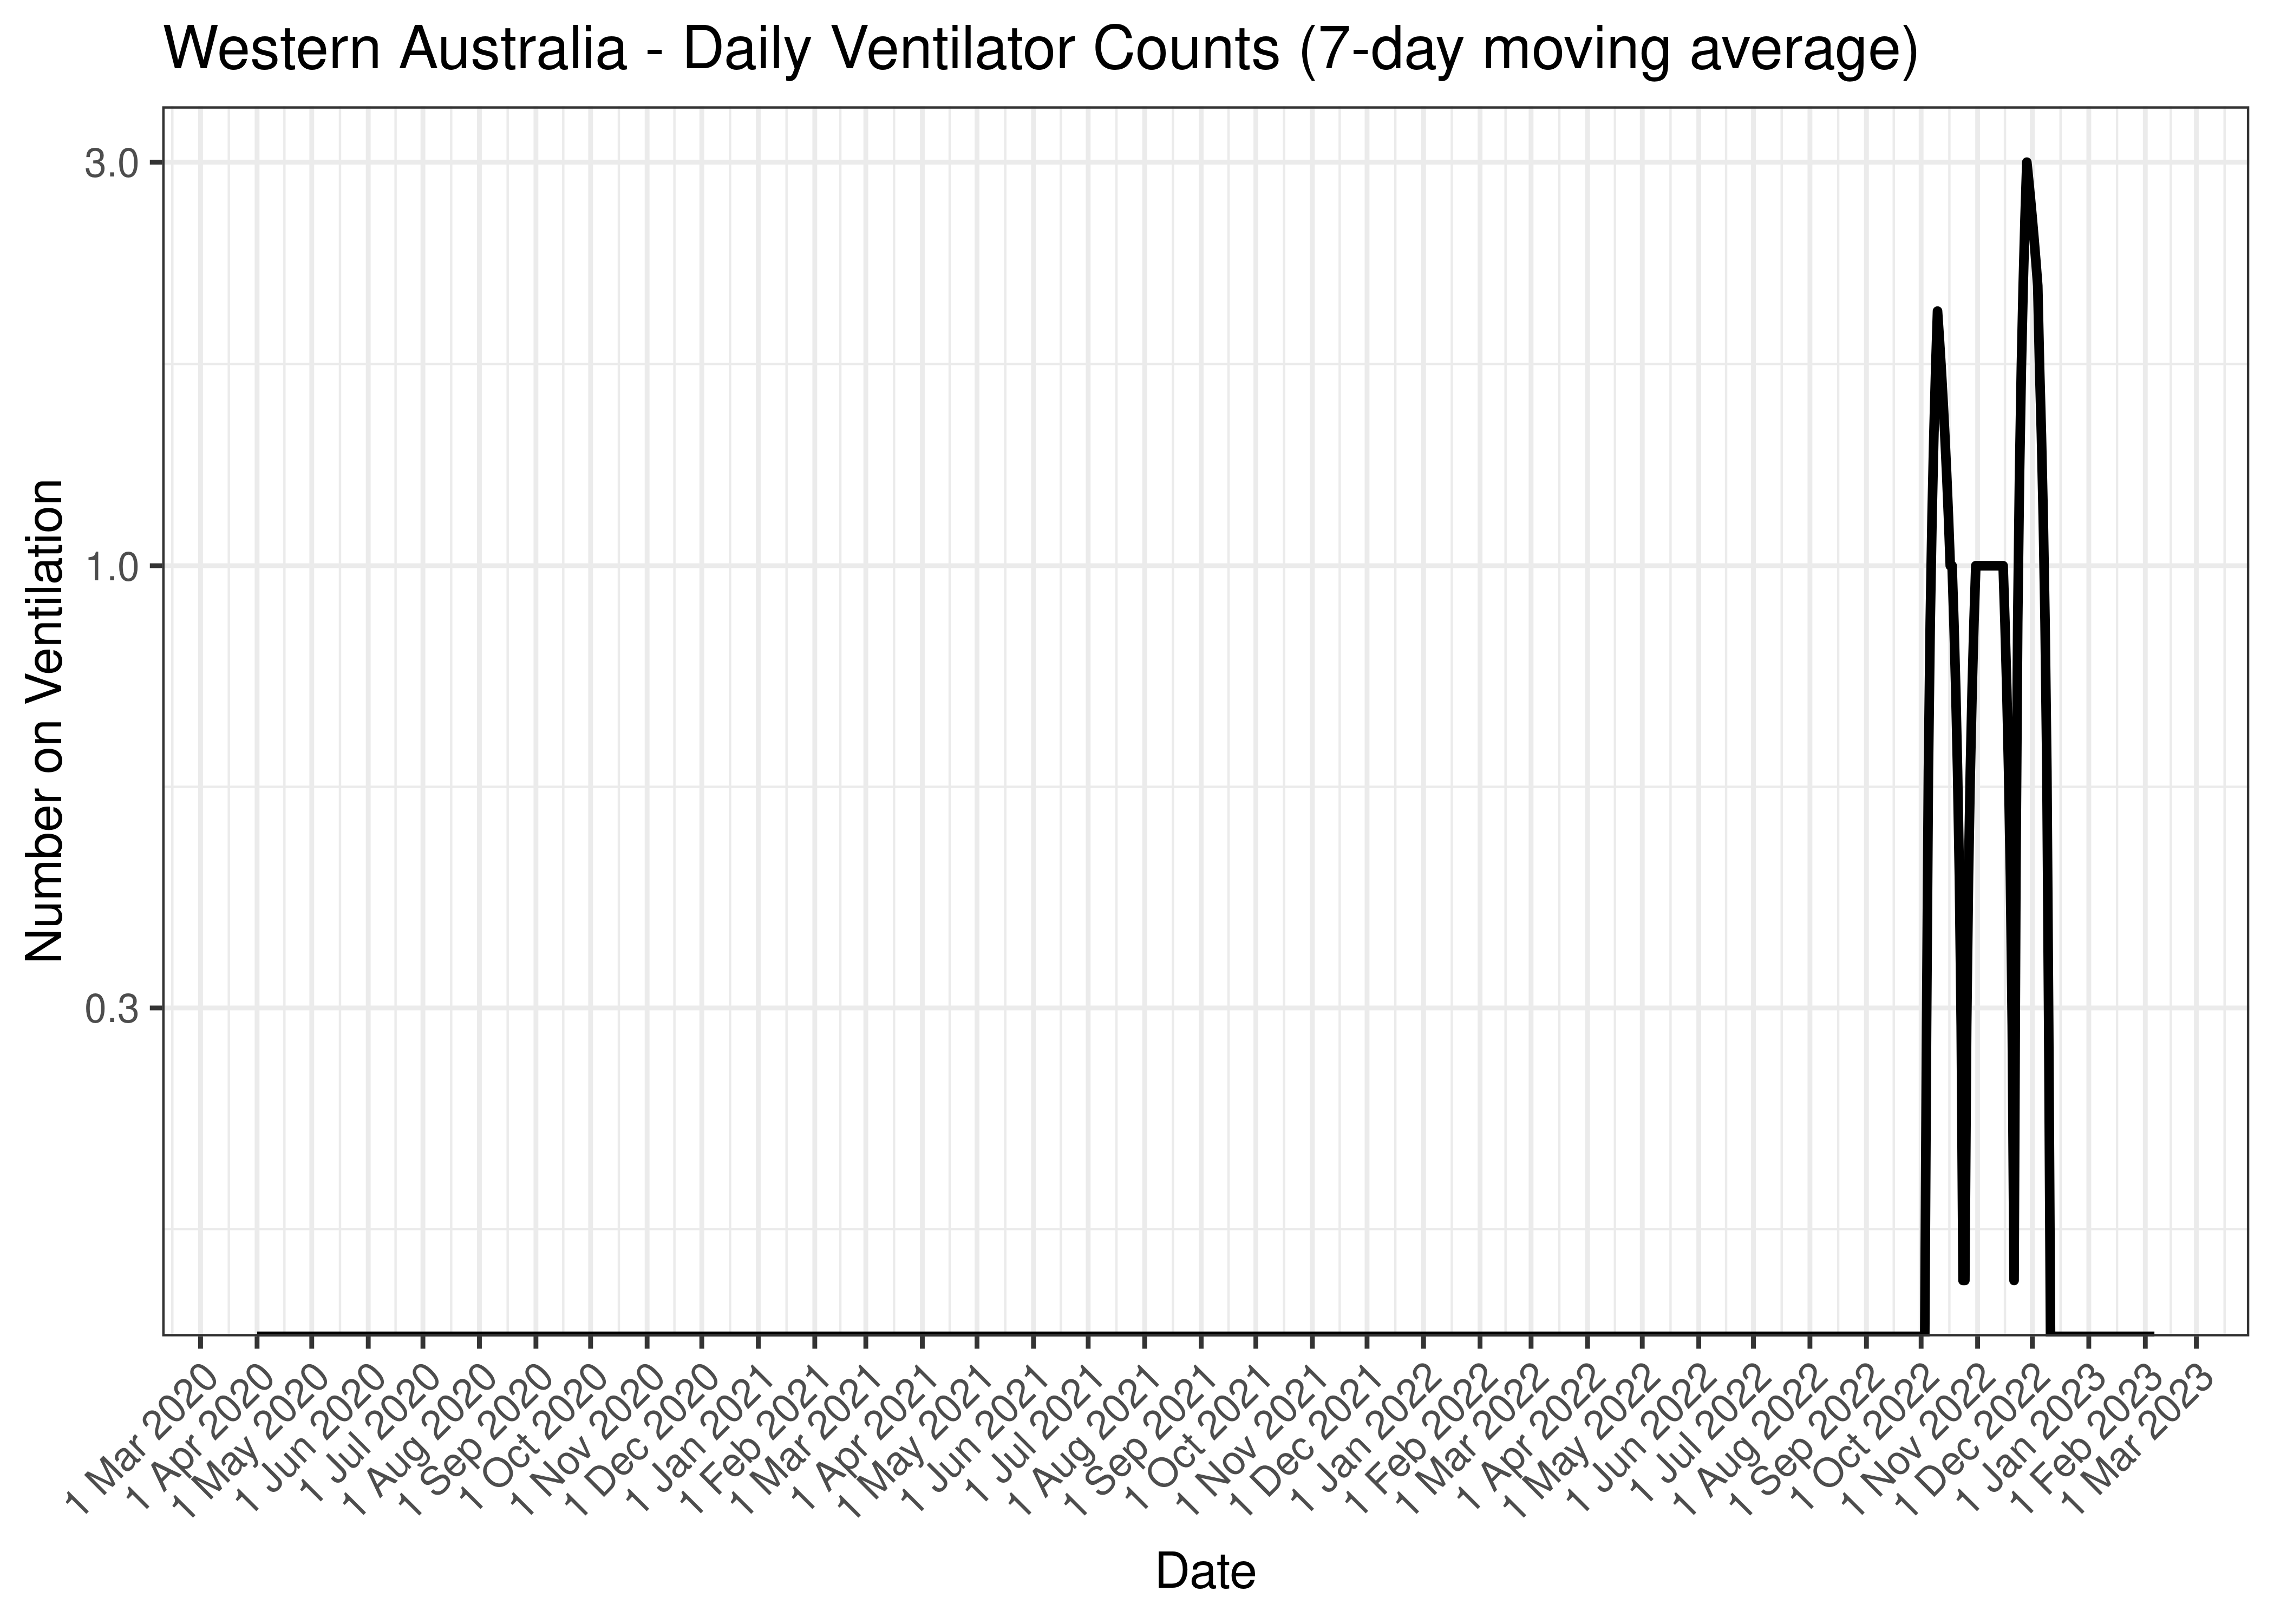 Estimated Effective Reproduction Number Based on Cases for Victoria over last 90 days